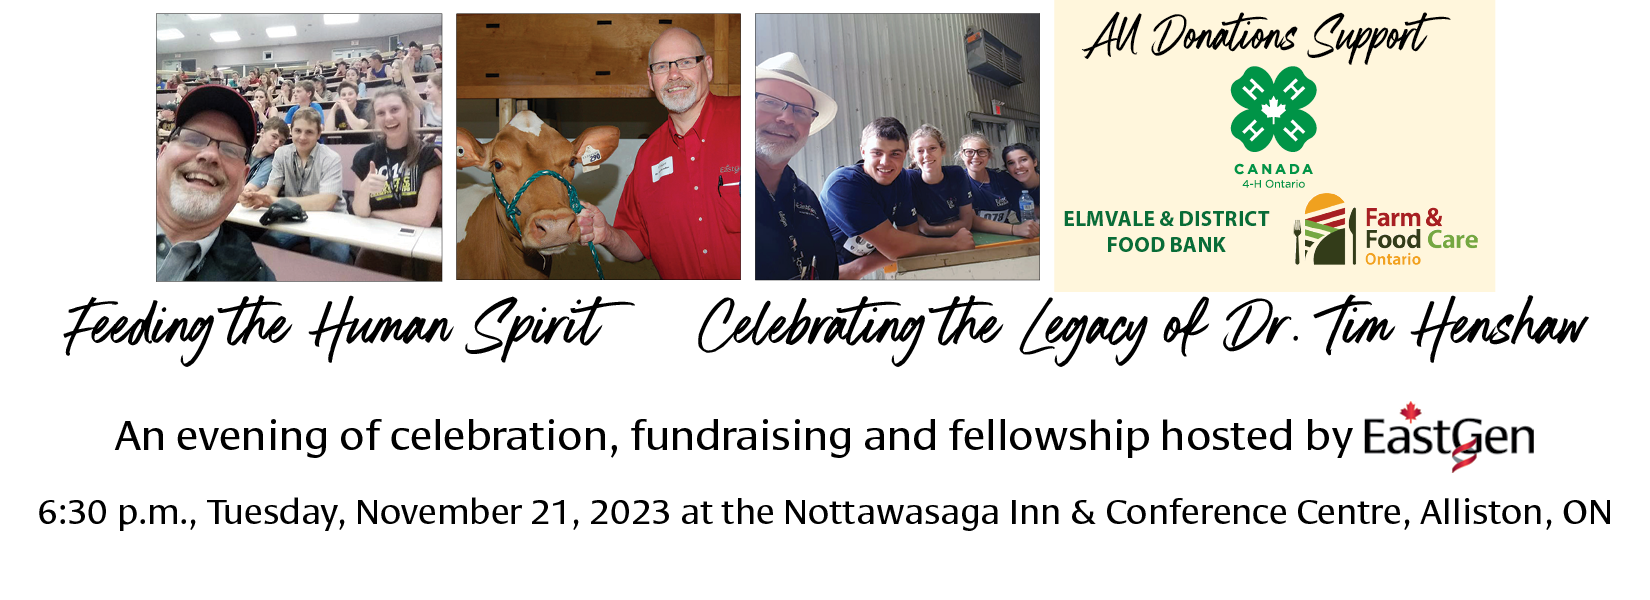 Donations Page - Feeding the Human Spirit - Celebrating the Legacy of Dr. Tim Henshaw - Presented by EastGen